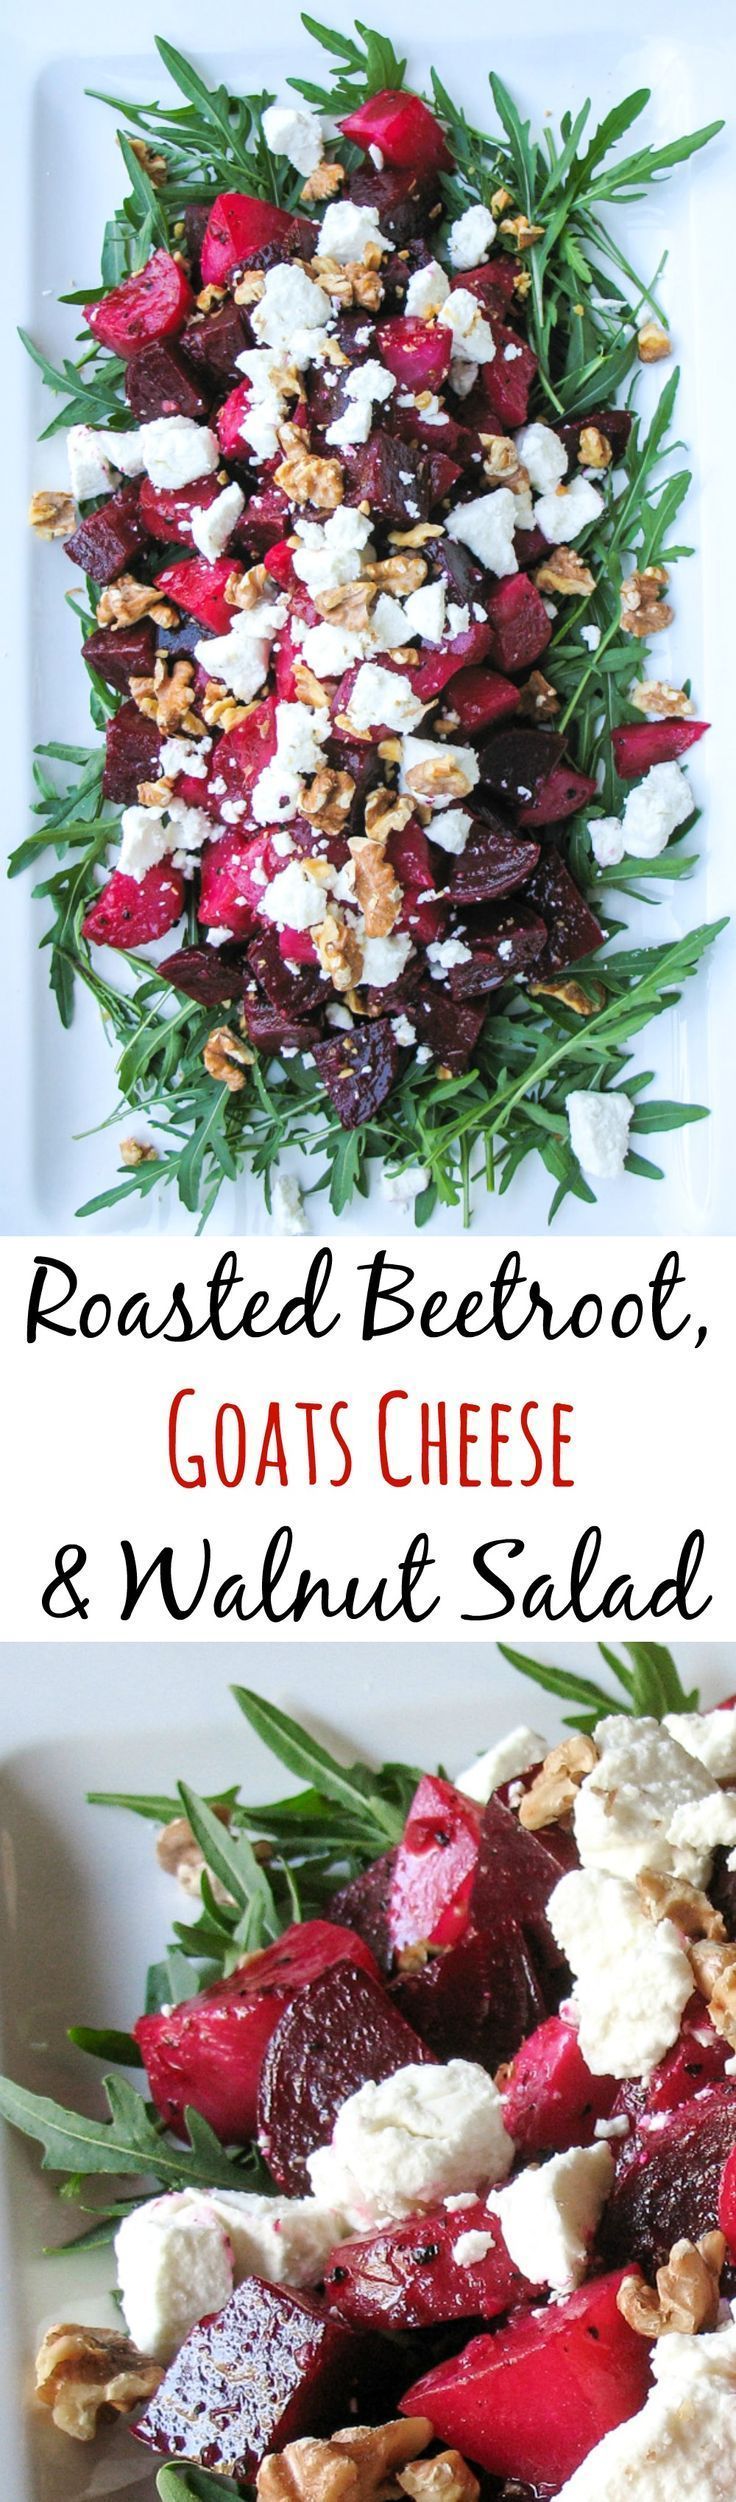 Roasted Beetroot, Goats Cheese & Walnut Salad.  A Great main course salad.